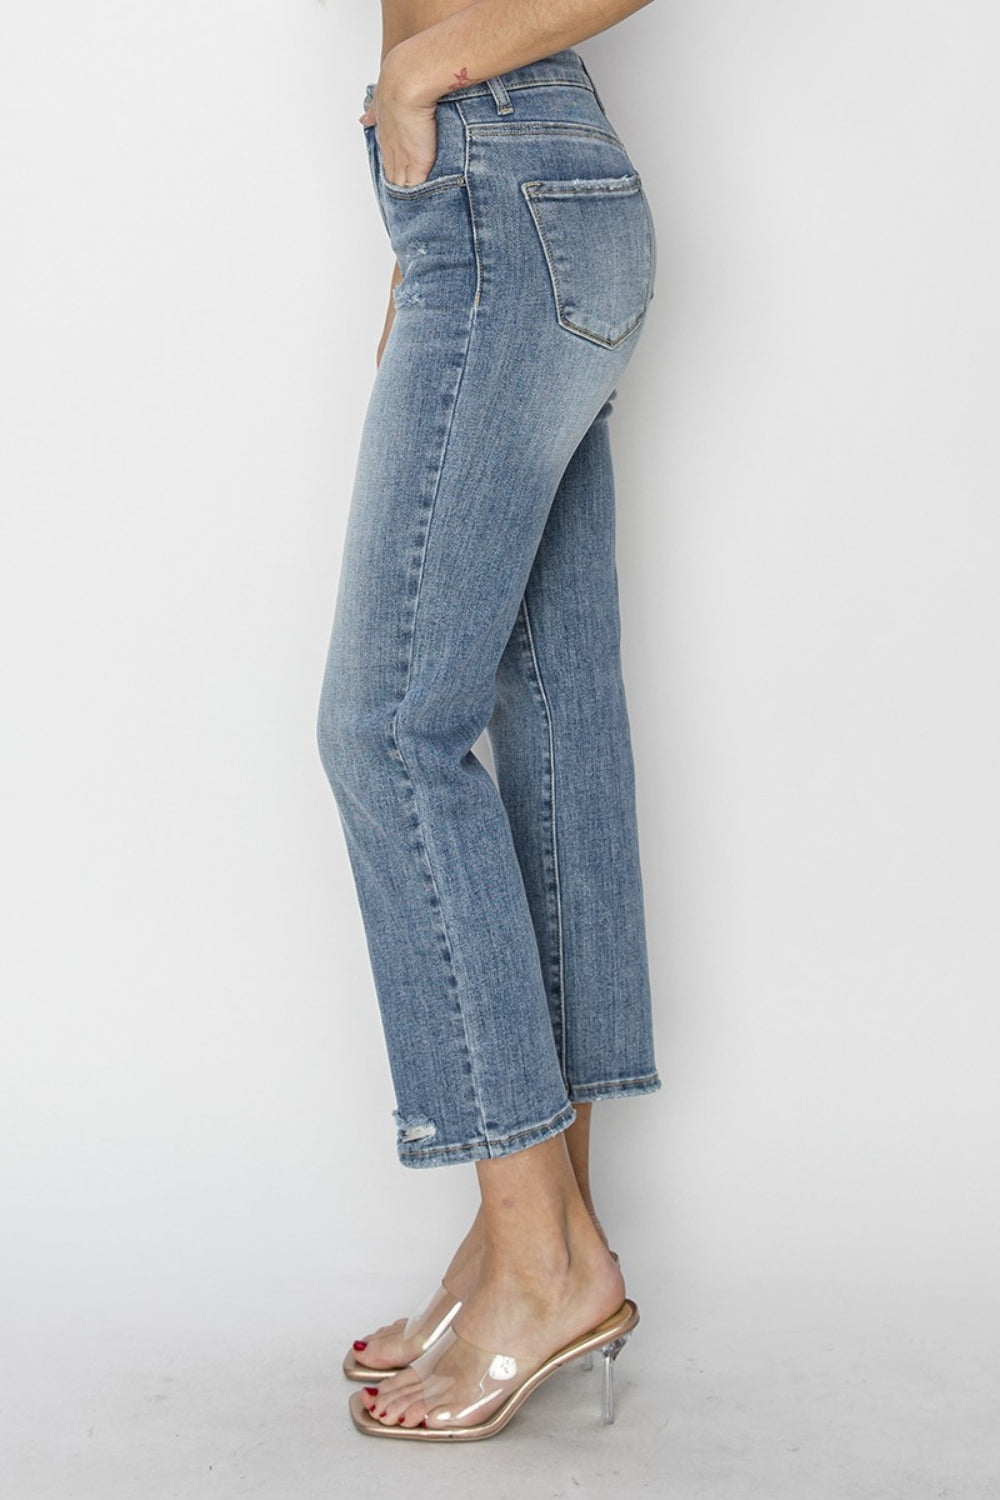 The High Waist Distressed Cropped Jeans are a trendy and edgy addition to your denim collection. The high waist design offers a flattering and on-trend silhouette. The distressed detailing adds a cool and rugged vibe to the cropped jeans. 